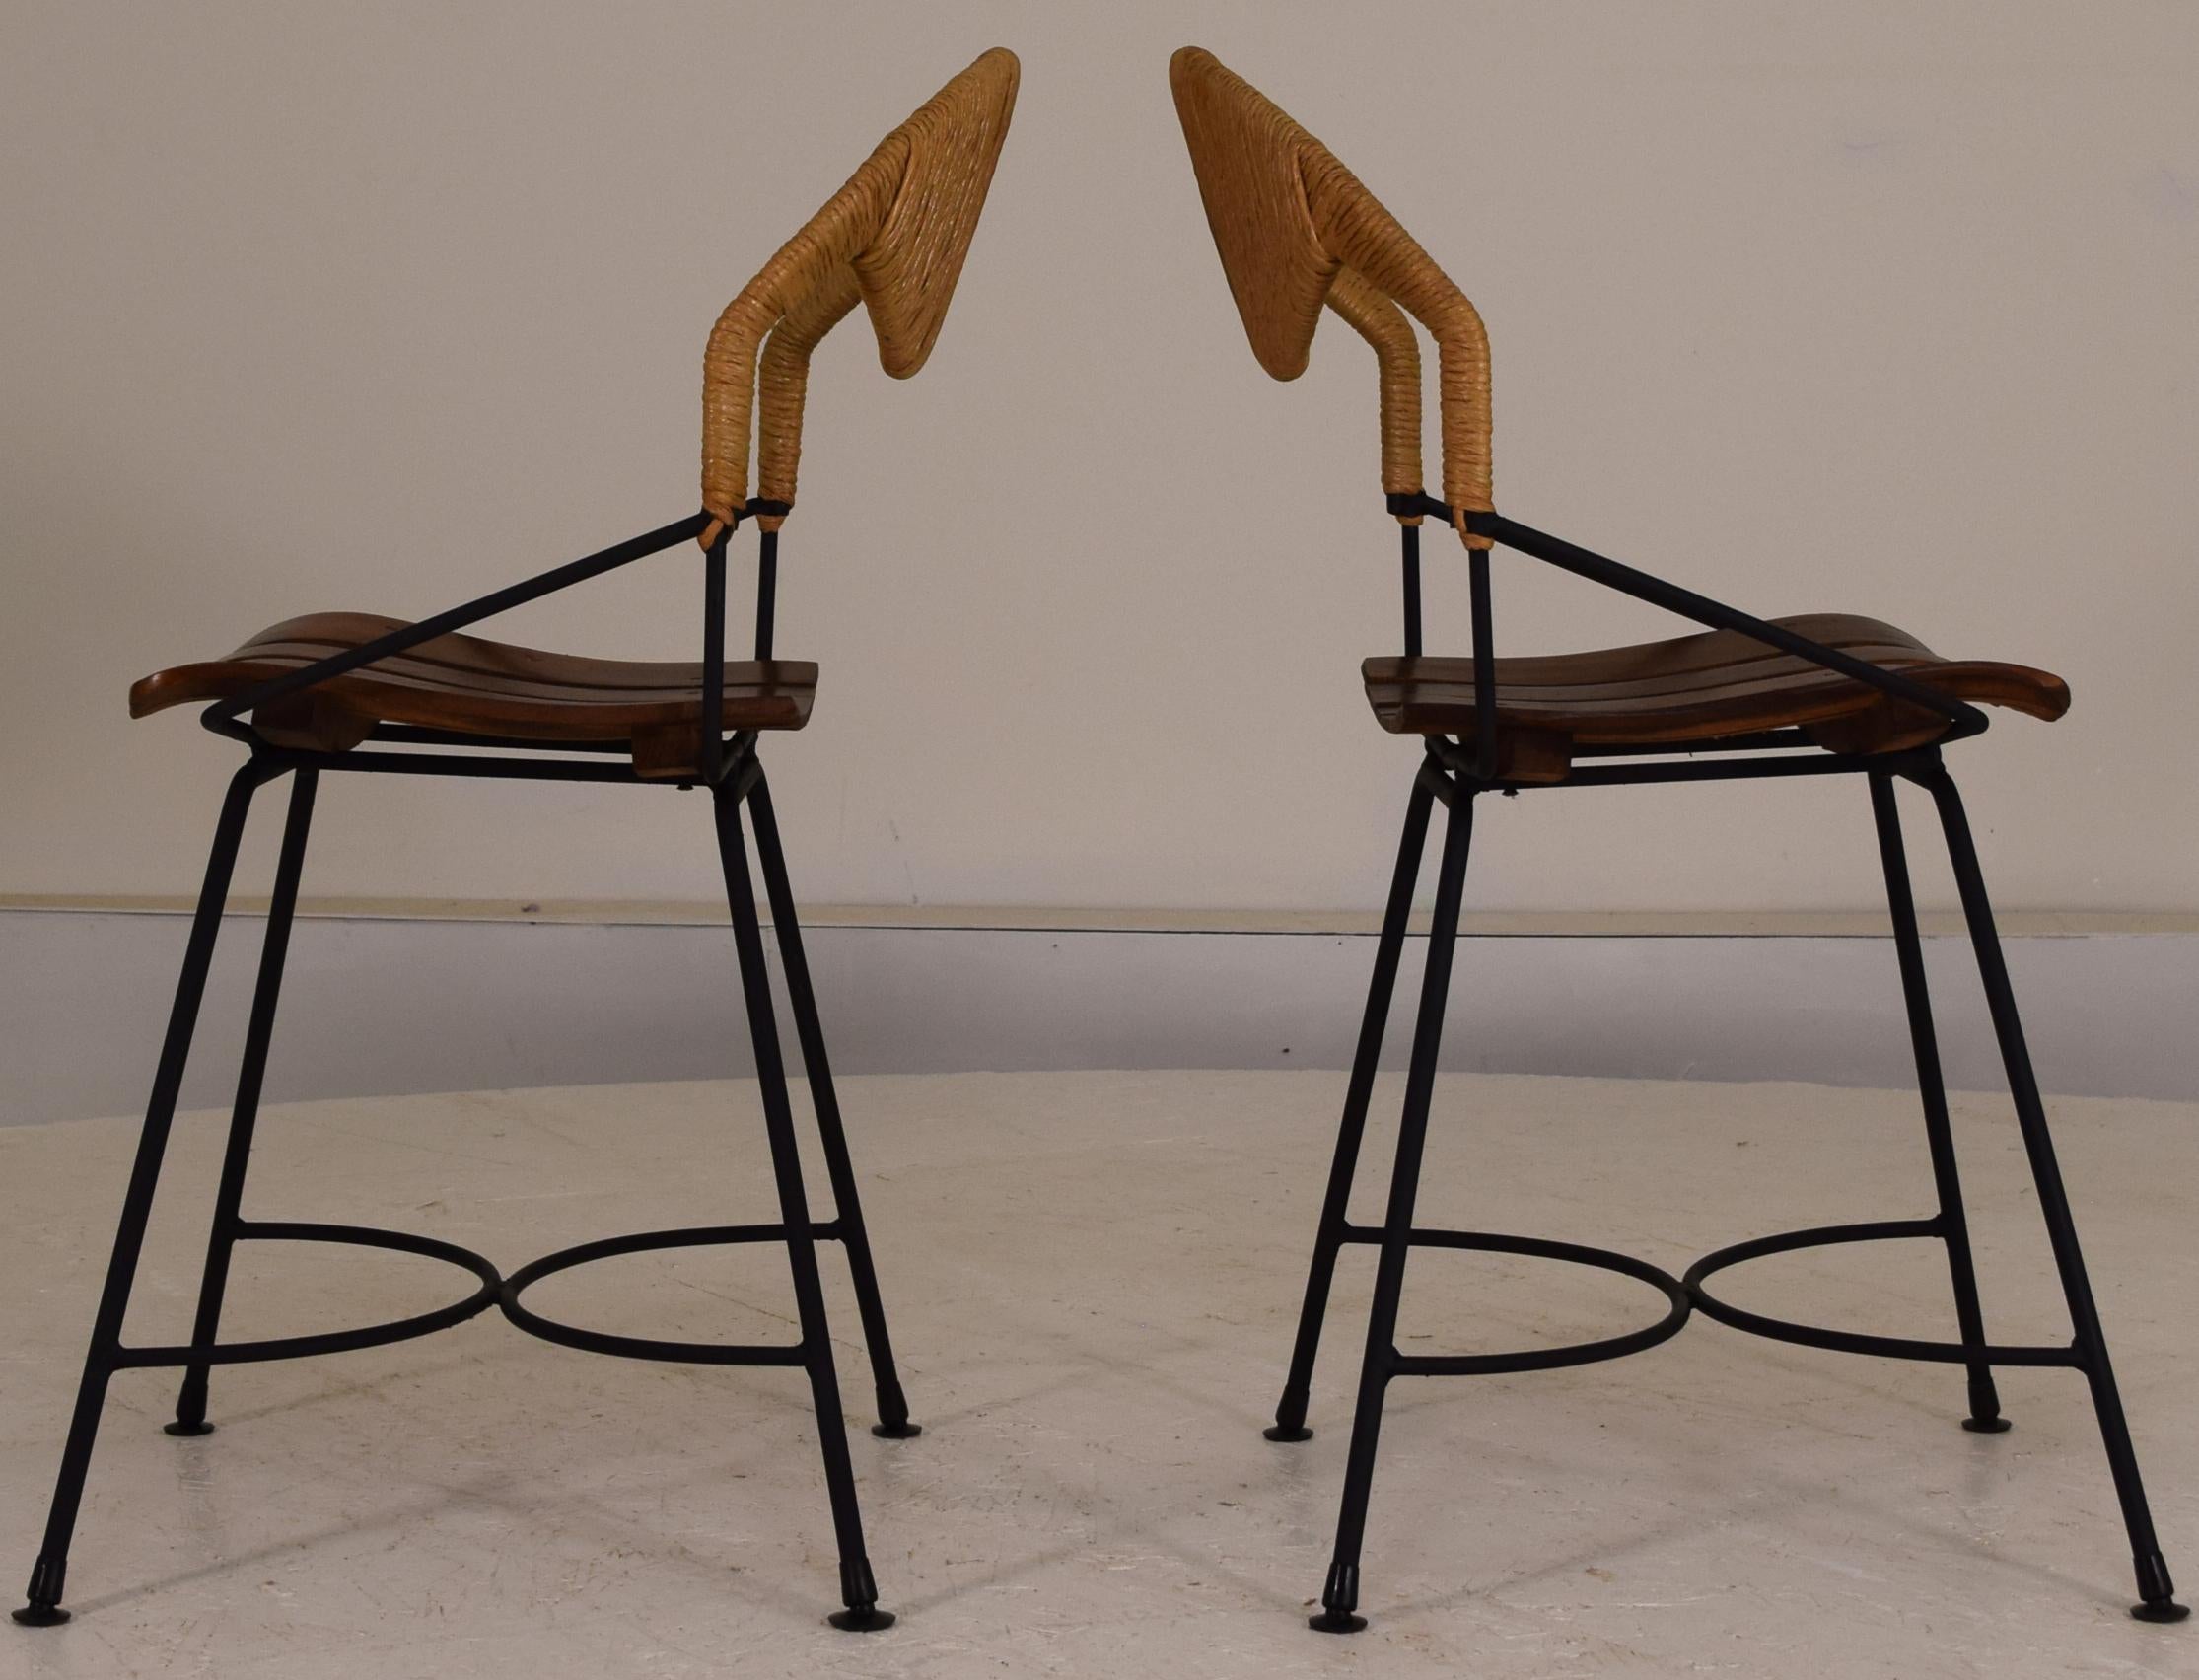 Price is for the set of 2. Modernist chairs, Shaver Howard production. Set of 2 chairs. Beautiful lines of iron and wood slats with fiber rush woven backs. In exceptional condition still with original feet on each leg. Ideal of closed patio or other